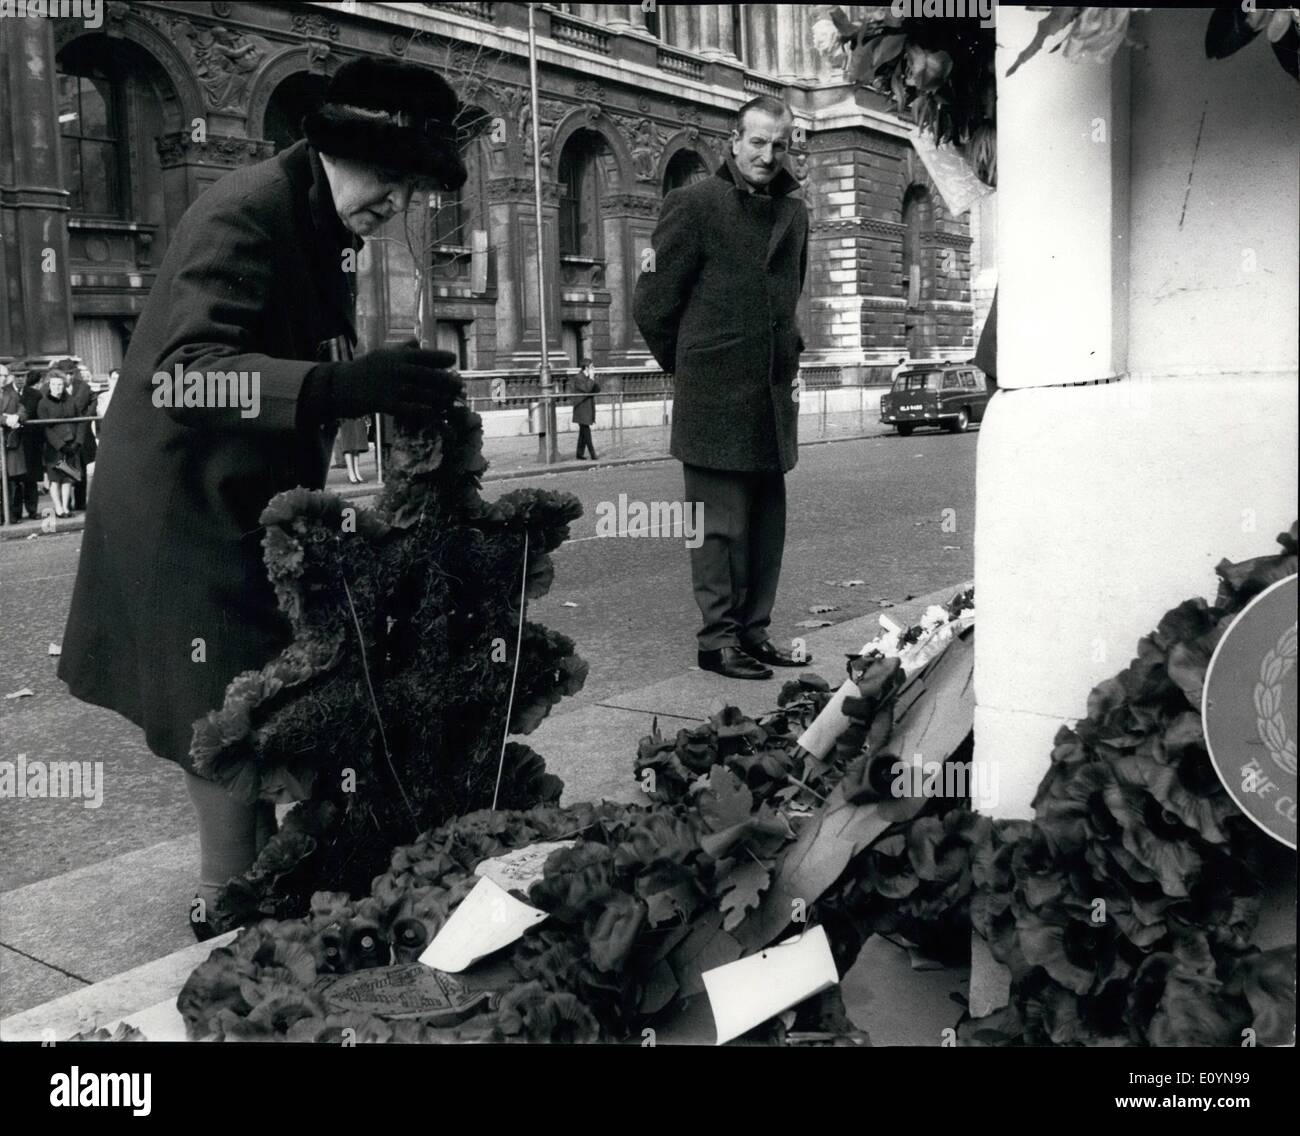 Nov. 11, 1970 - Cenotaph wreath in loving memory of Fred.: At 11 o'clock today, Fred Kemp, who went to glory on a Belgian battlefield 55 years ago, had his usual wreath laid on the Cenotaph by his widow, Louisia. ''The time for remembrance'', says Louisia Kemp, of Brixton, now in her 84th year, ''is the 11th hour of the 11th day of the 11th month''. And that was when she remembered her Grenndier Guardman who went out of her life in 1915. In a sense, Louisia Kemp has never stopped looking after Fred Stock Photo